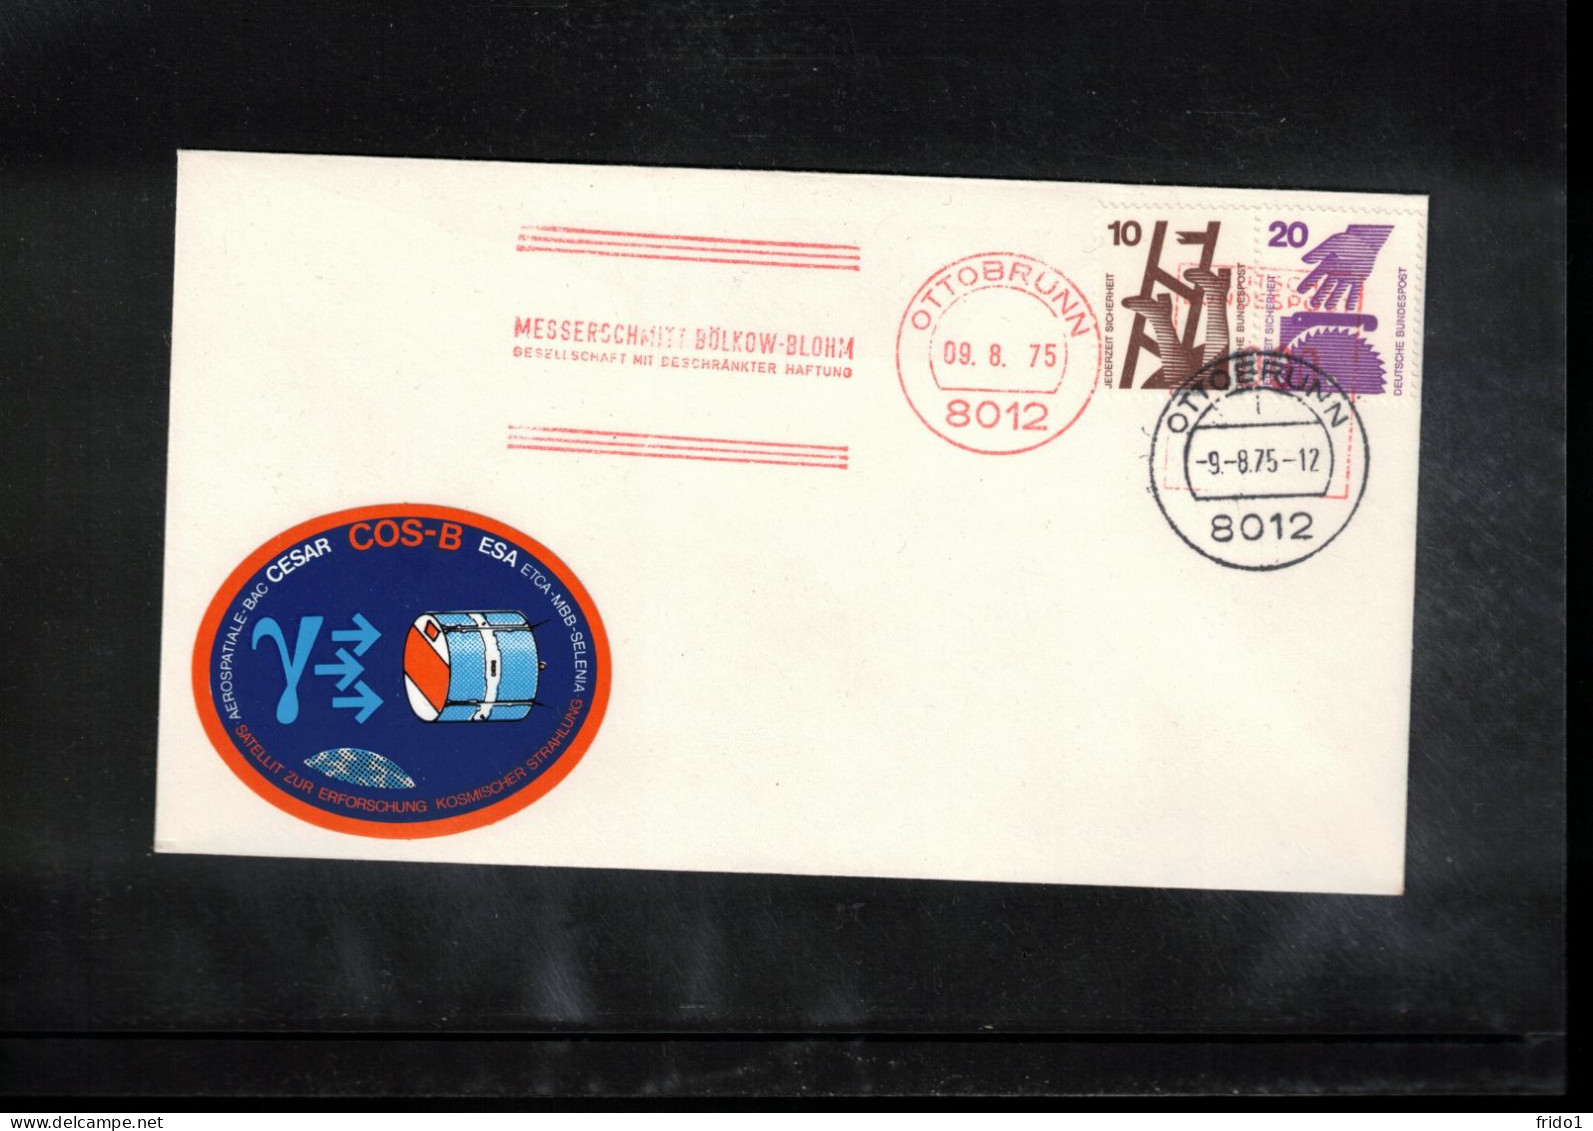 Germany 1975 Space / Weltraum ESA-USA Satellite COS-B Interesting Cover - United States